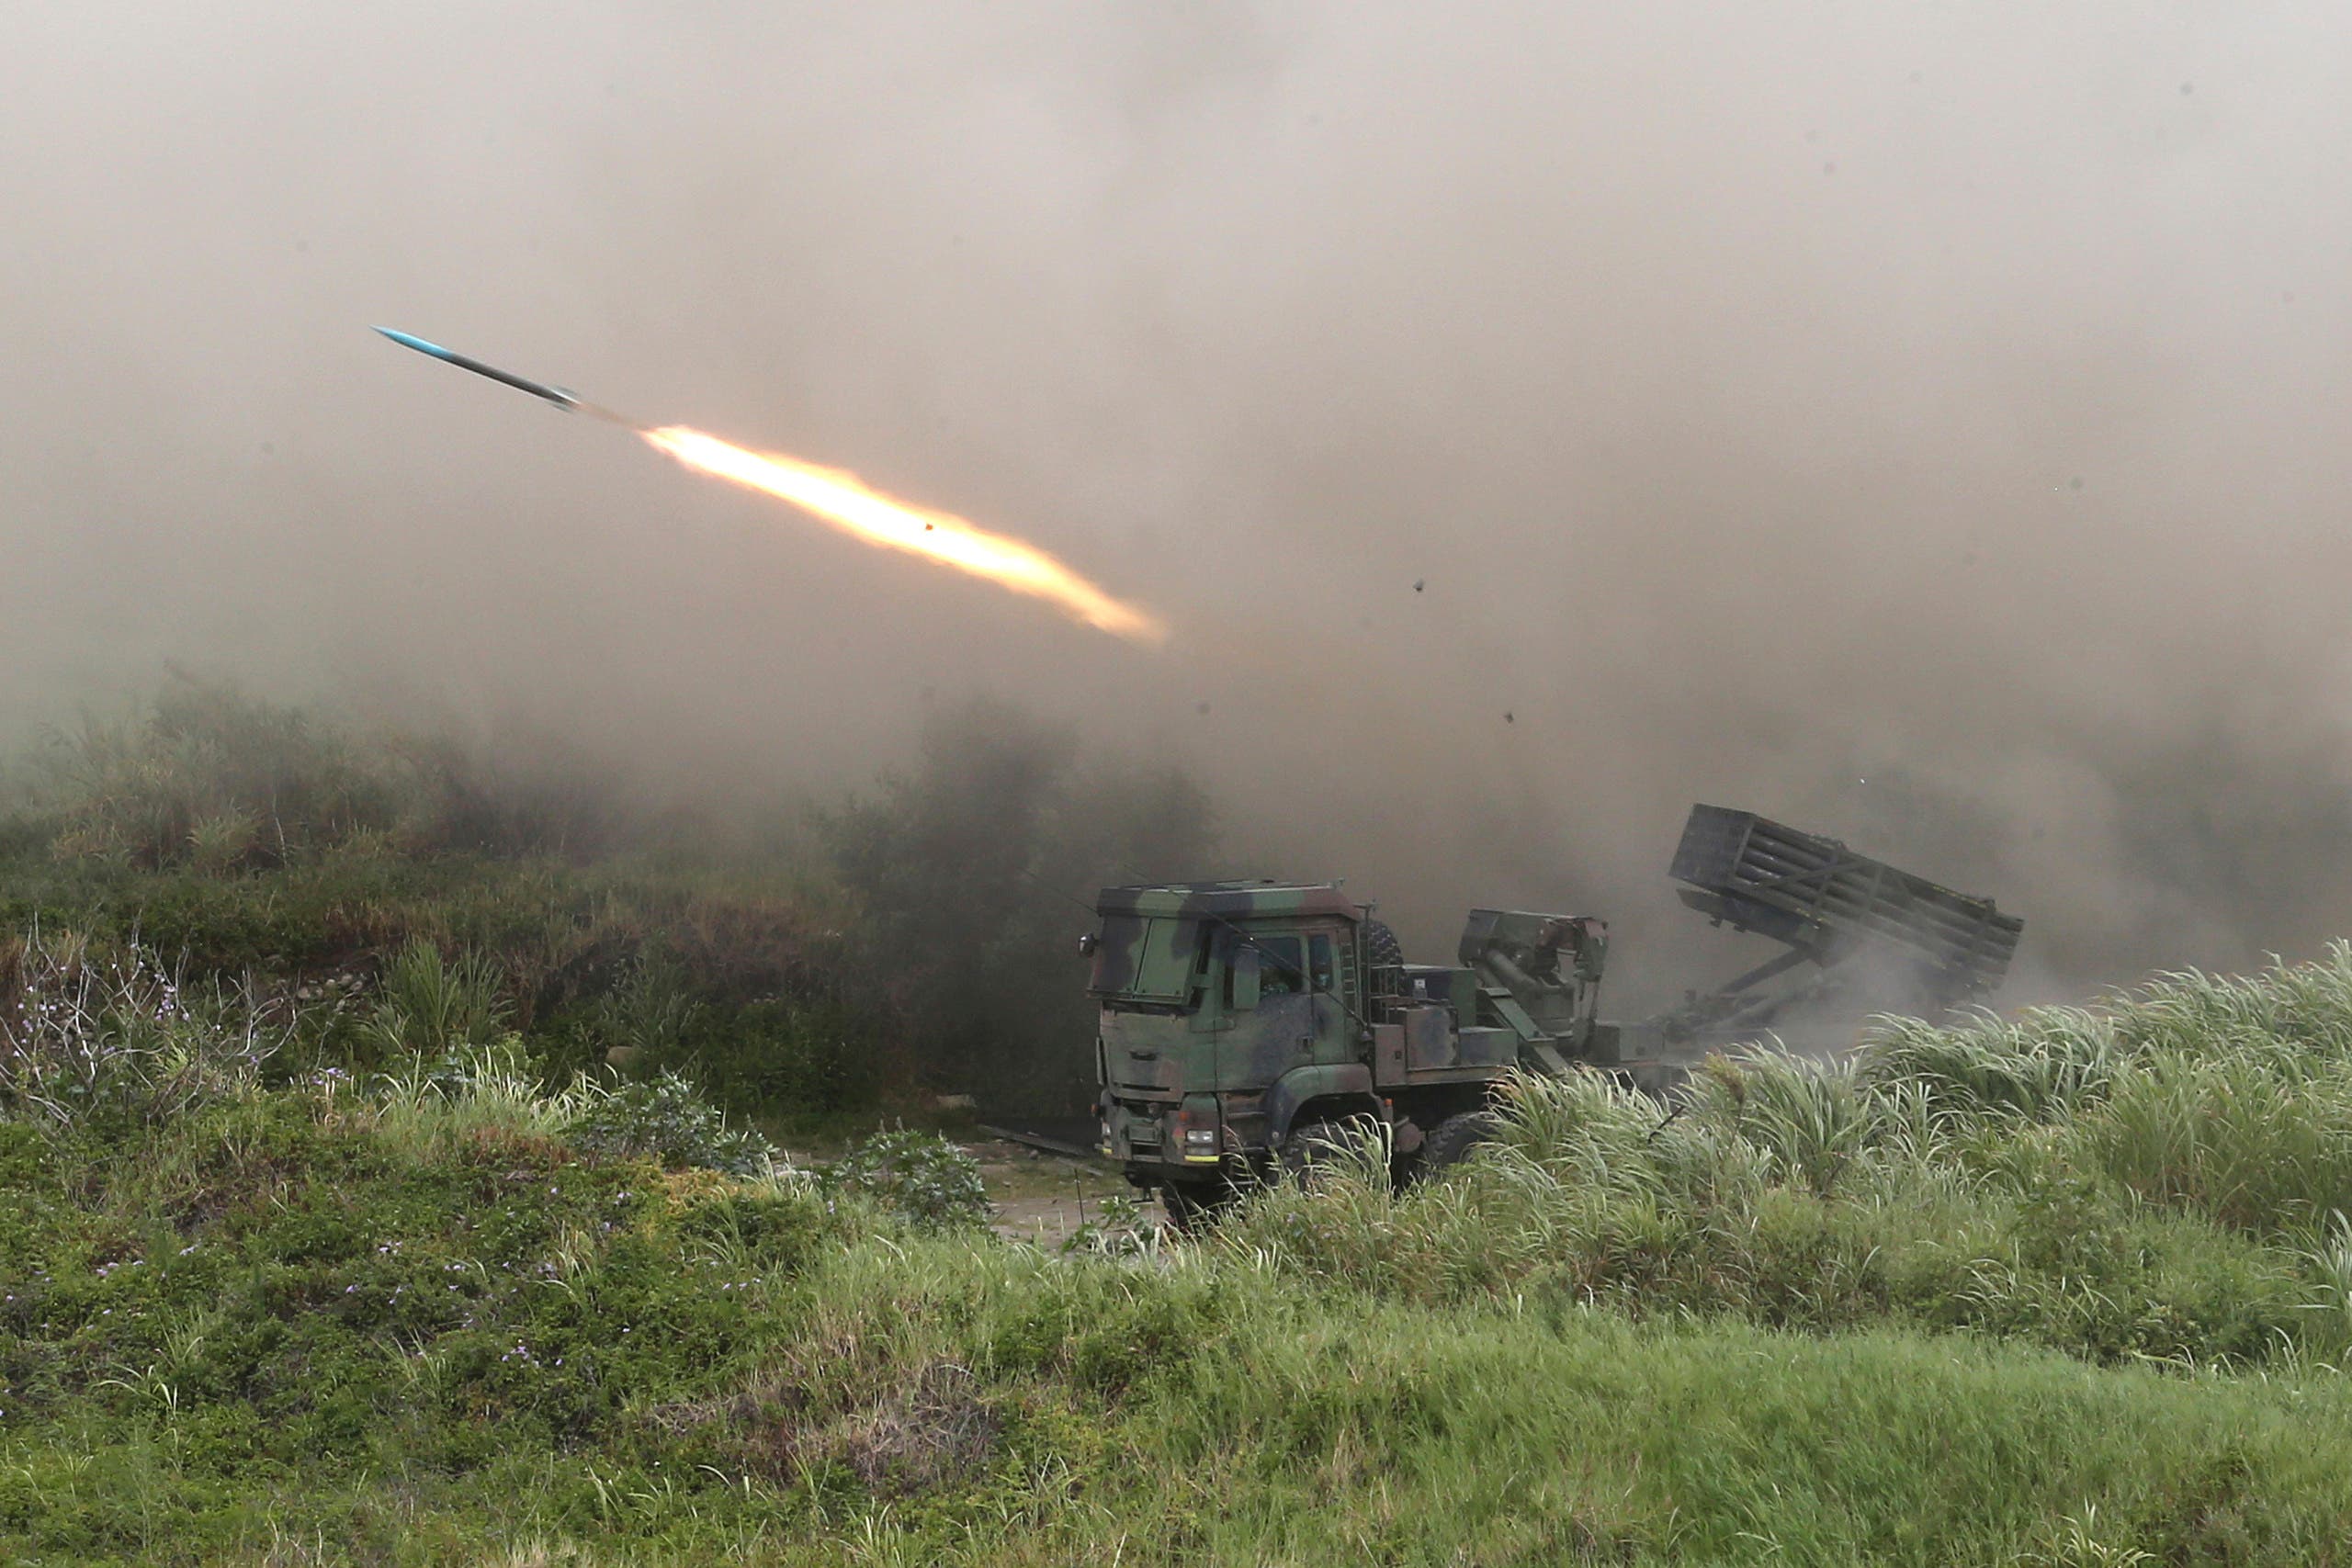 A rocket is fired from a Thunderbolt 2000 multi-rocket launcher during the 36th Han Kung military exercises in Taichung City, central Taiwan. (File photo: The Associated Press)